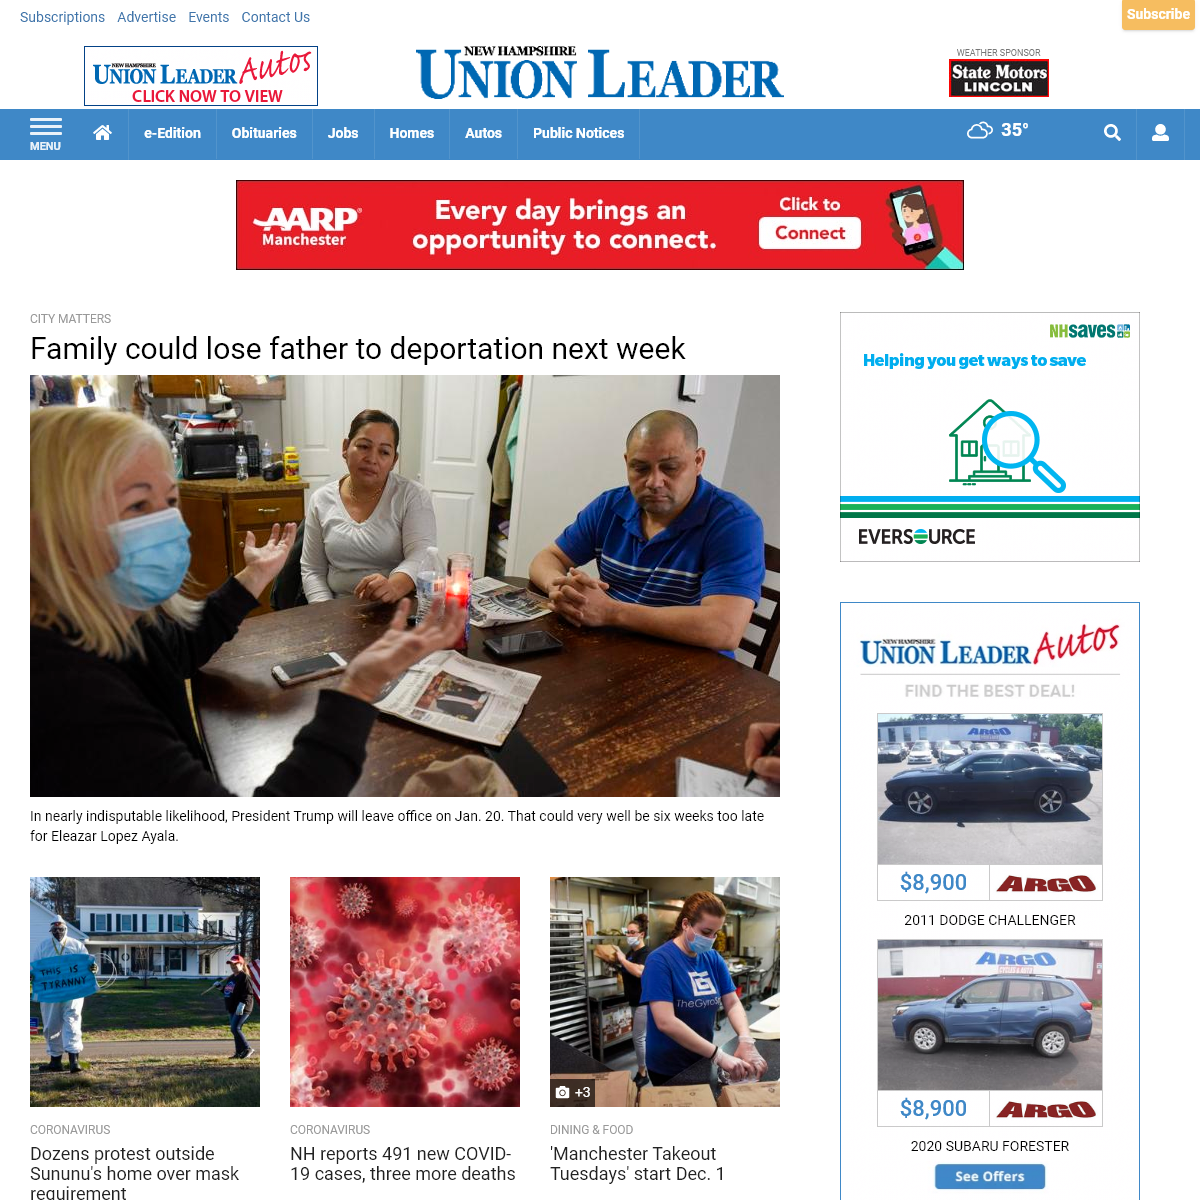 A complete backup of theunionleader.com